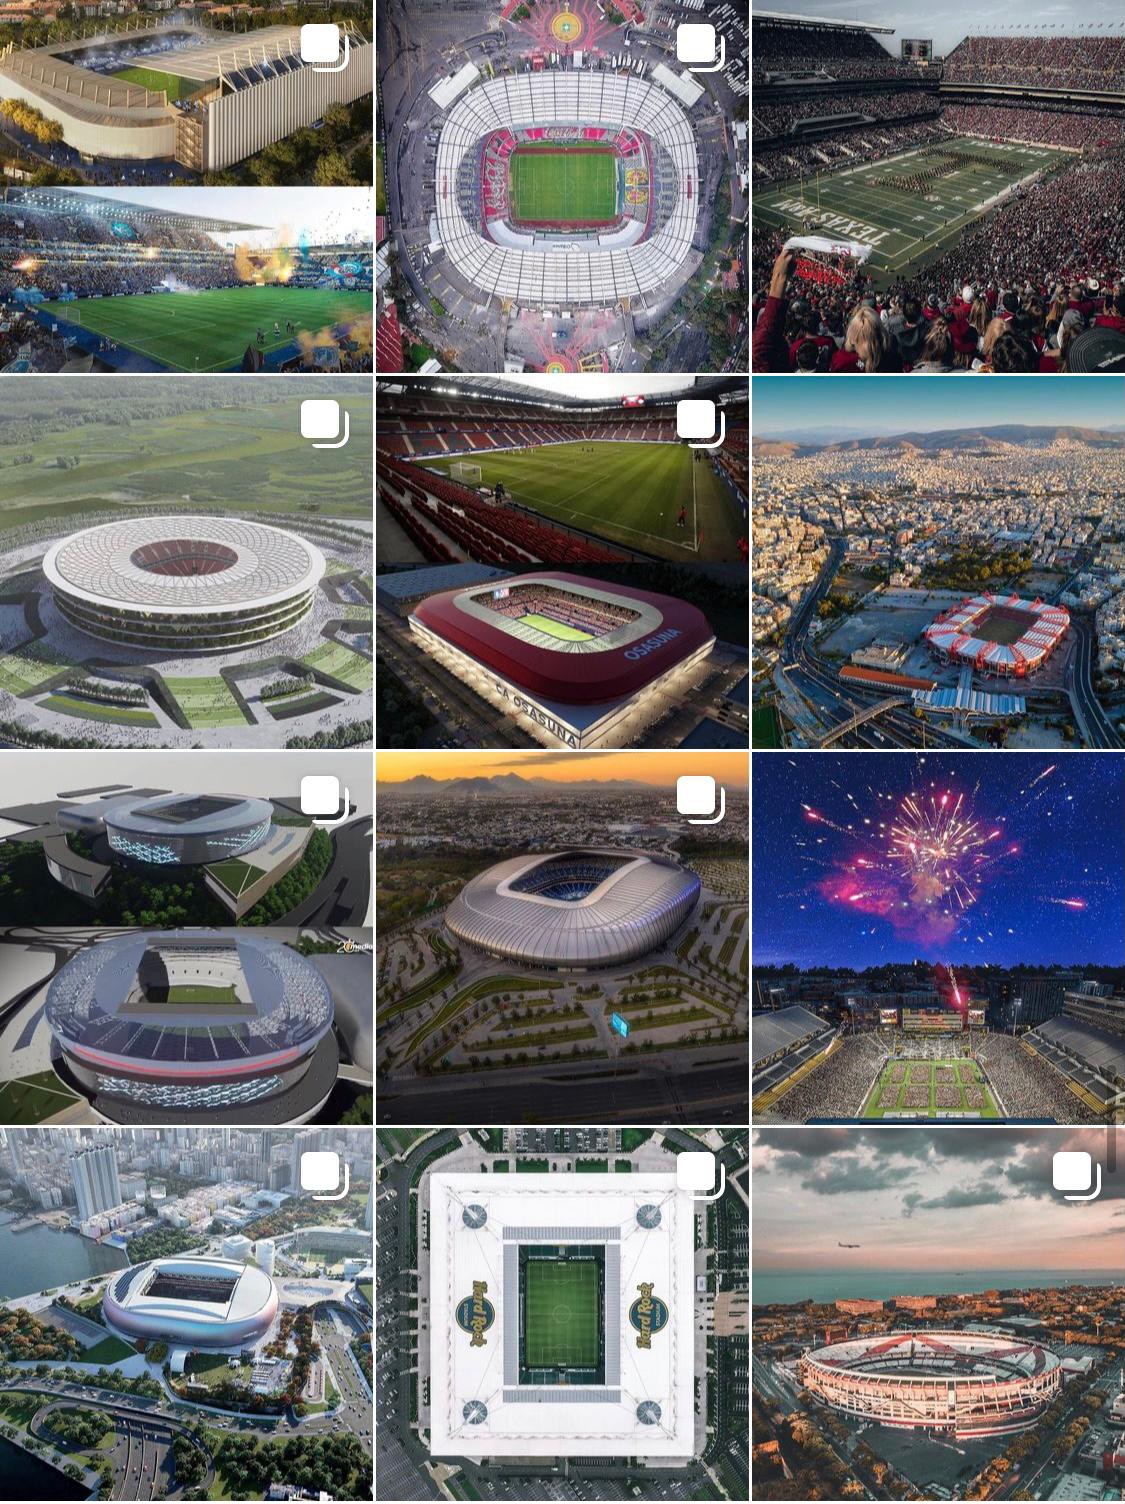 Join StadiumDB.com on Instagram to keep up with the best photos and current news